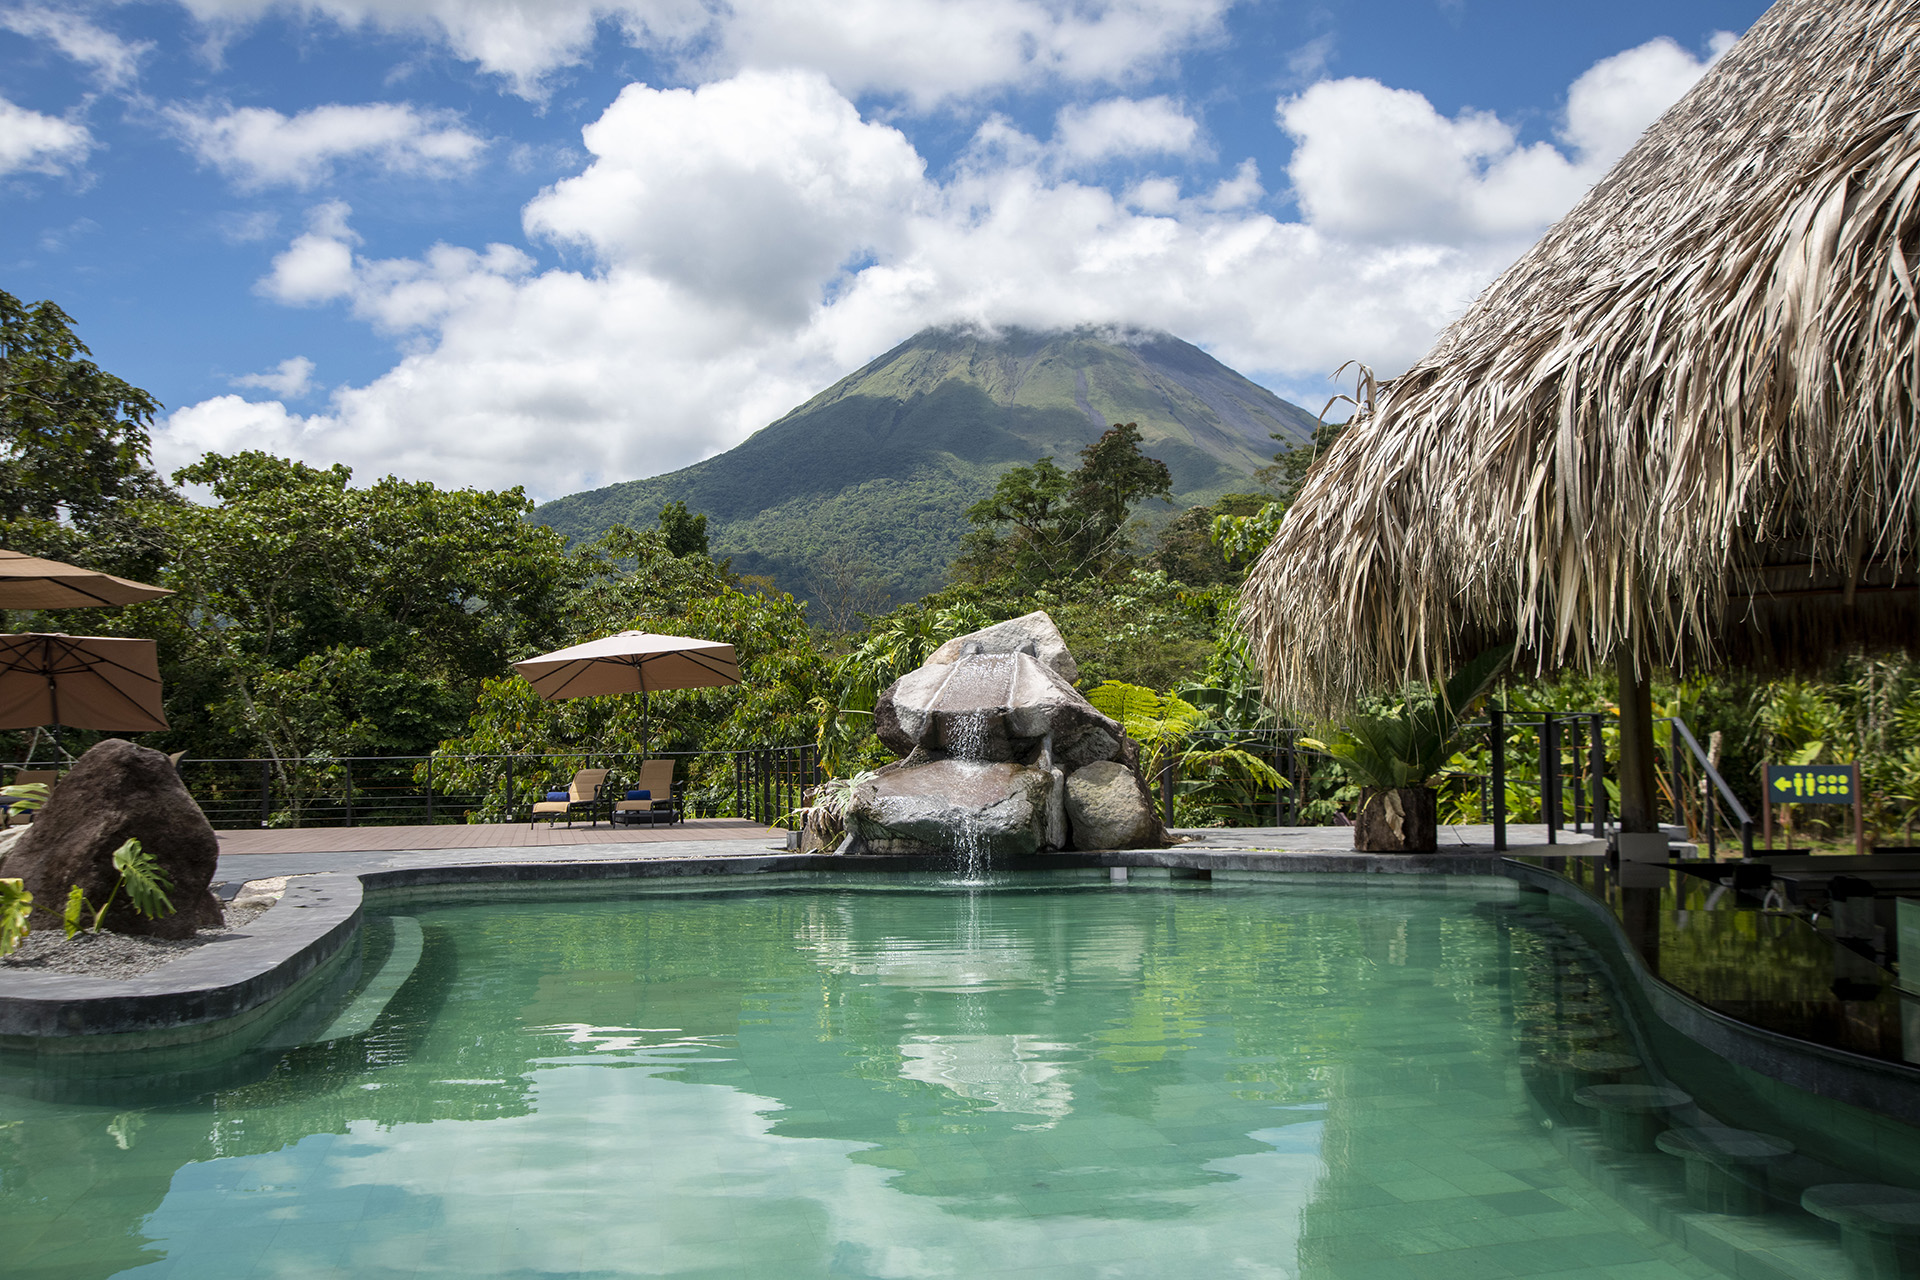 Arenal Manoa Hot Springs with Arenal Volcano in the background